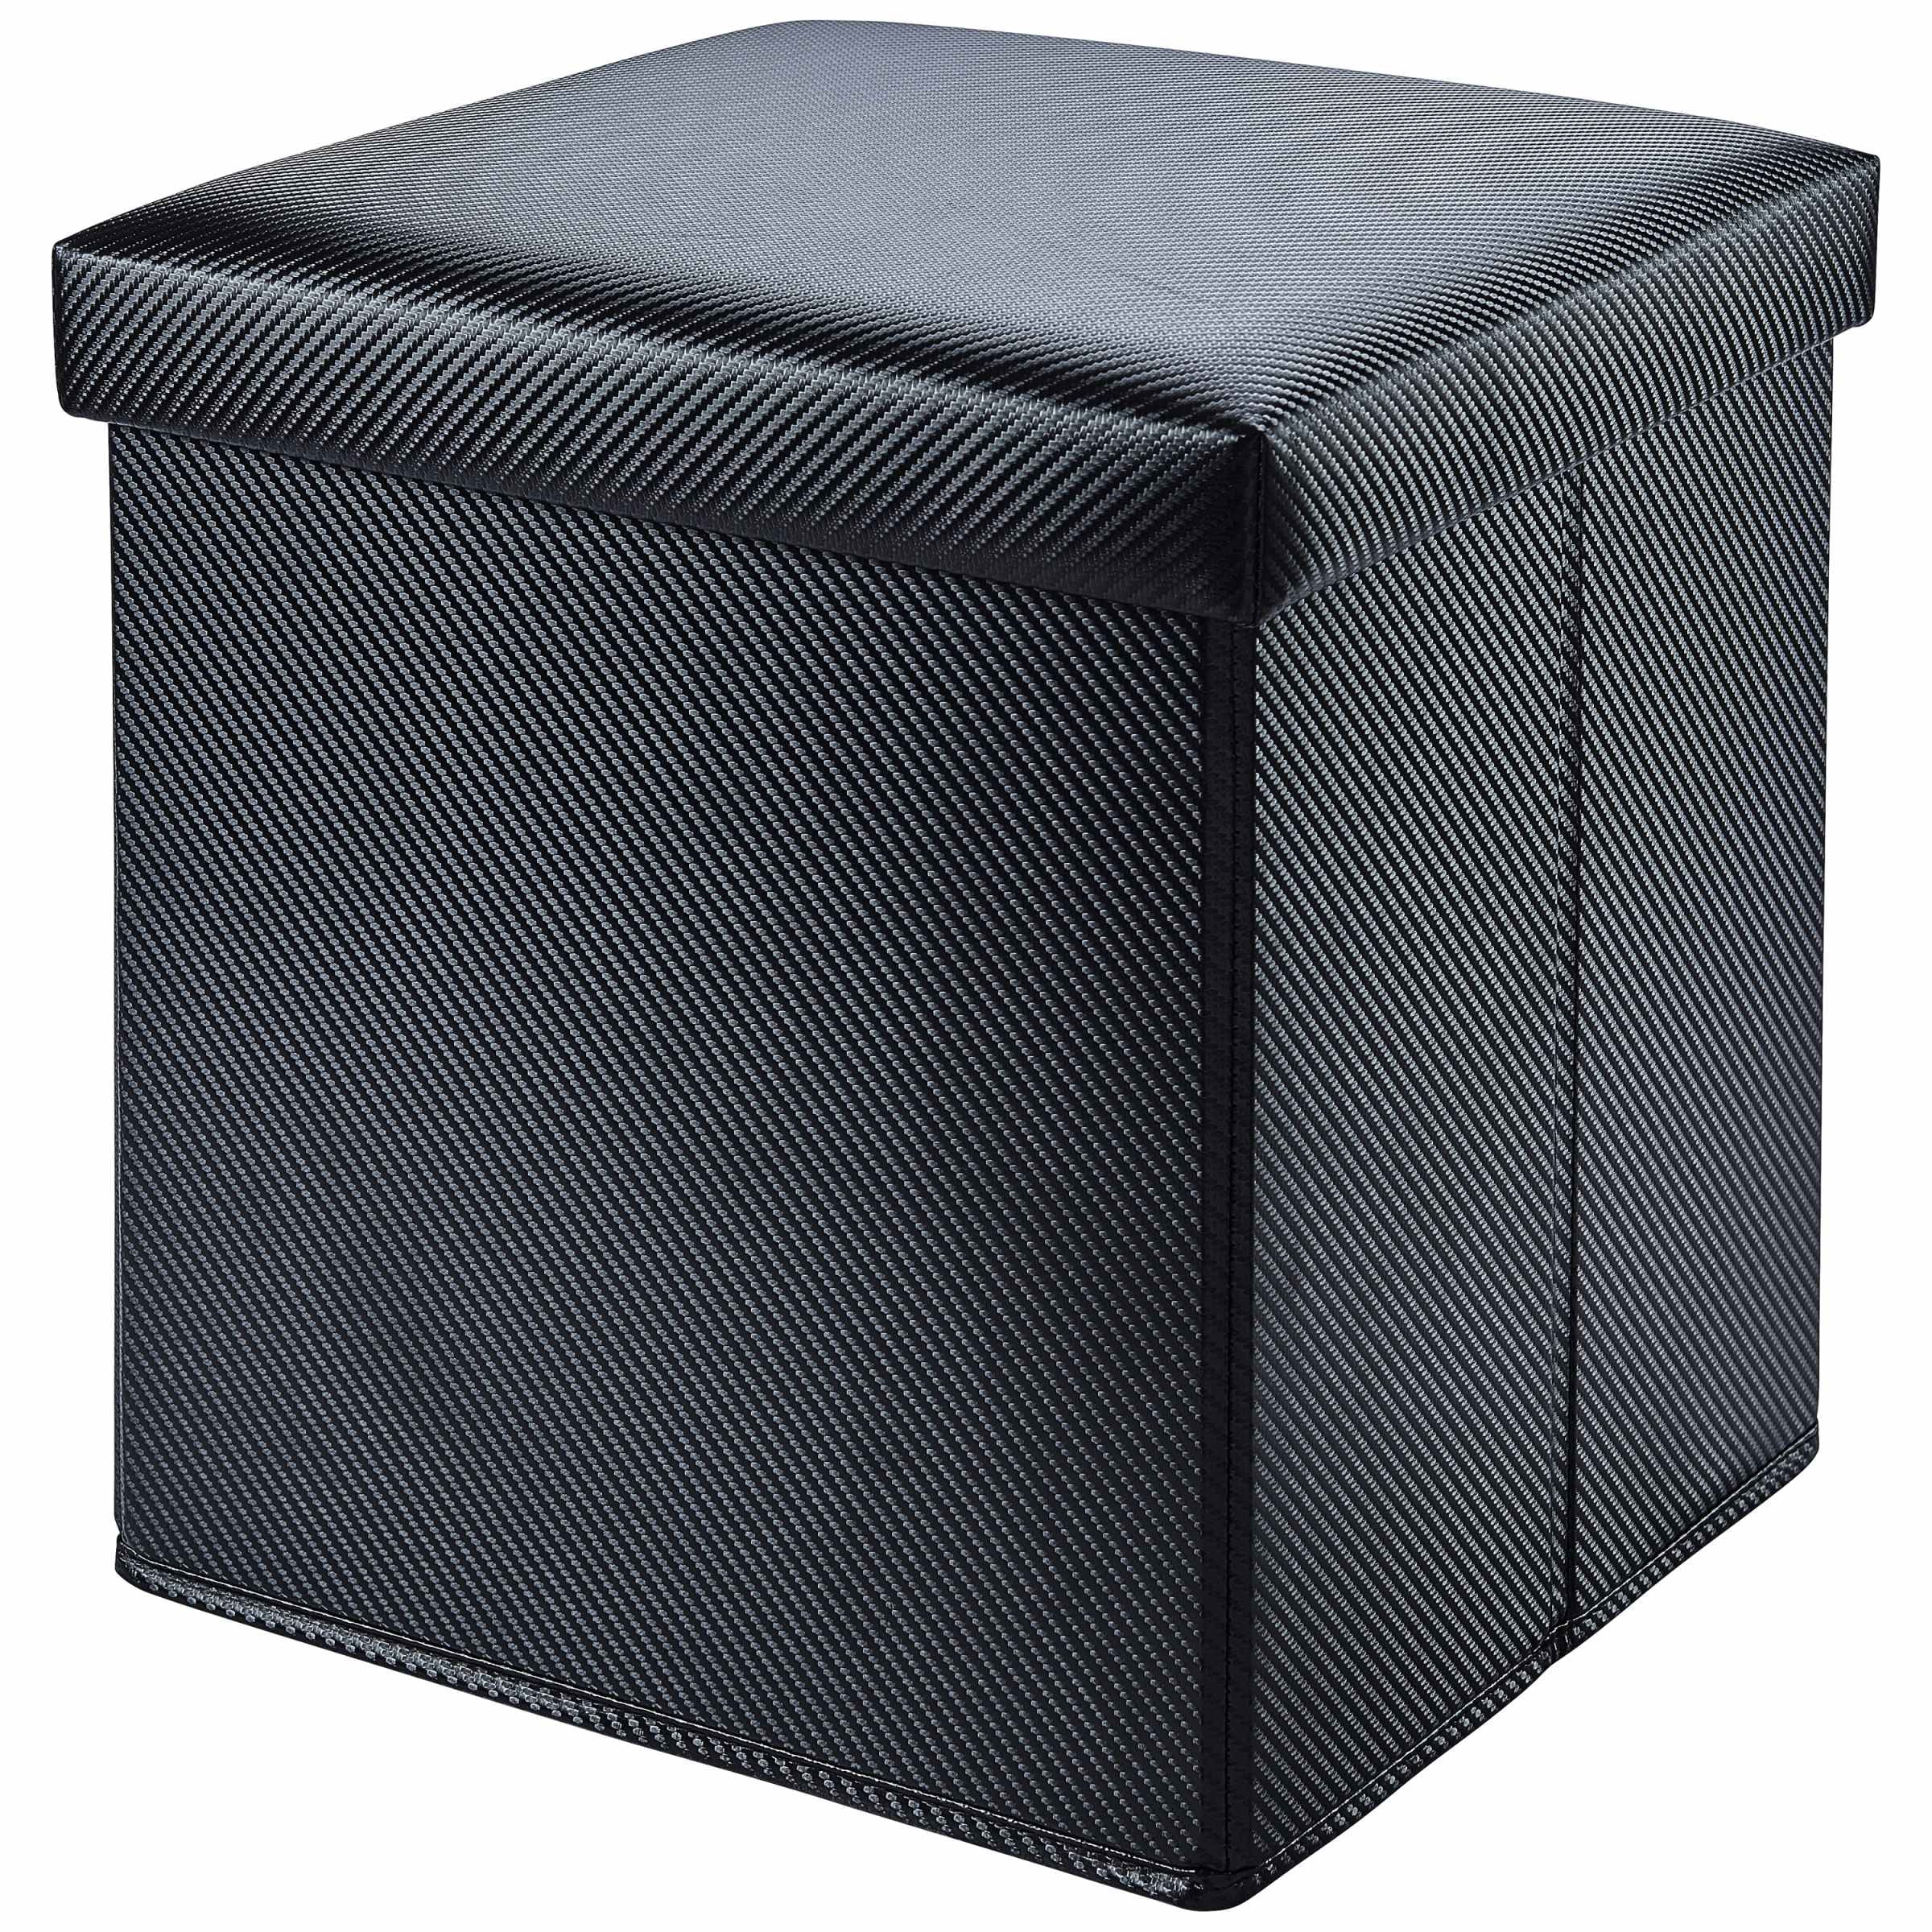 Mainstays Collapsible Storage Ottoman, Carbon Black Faux leather